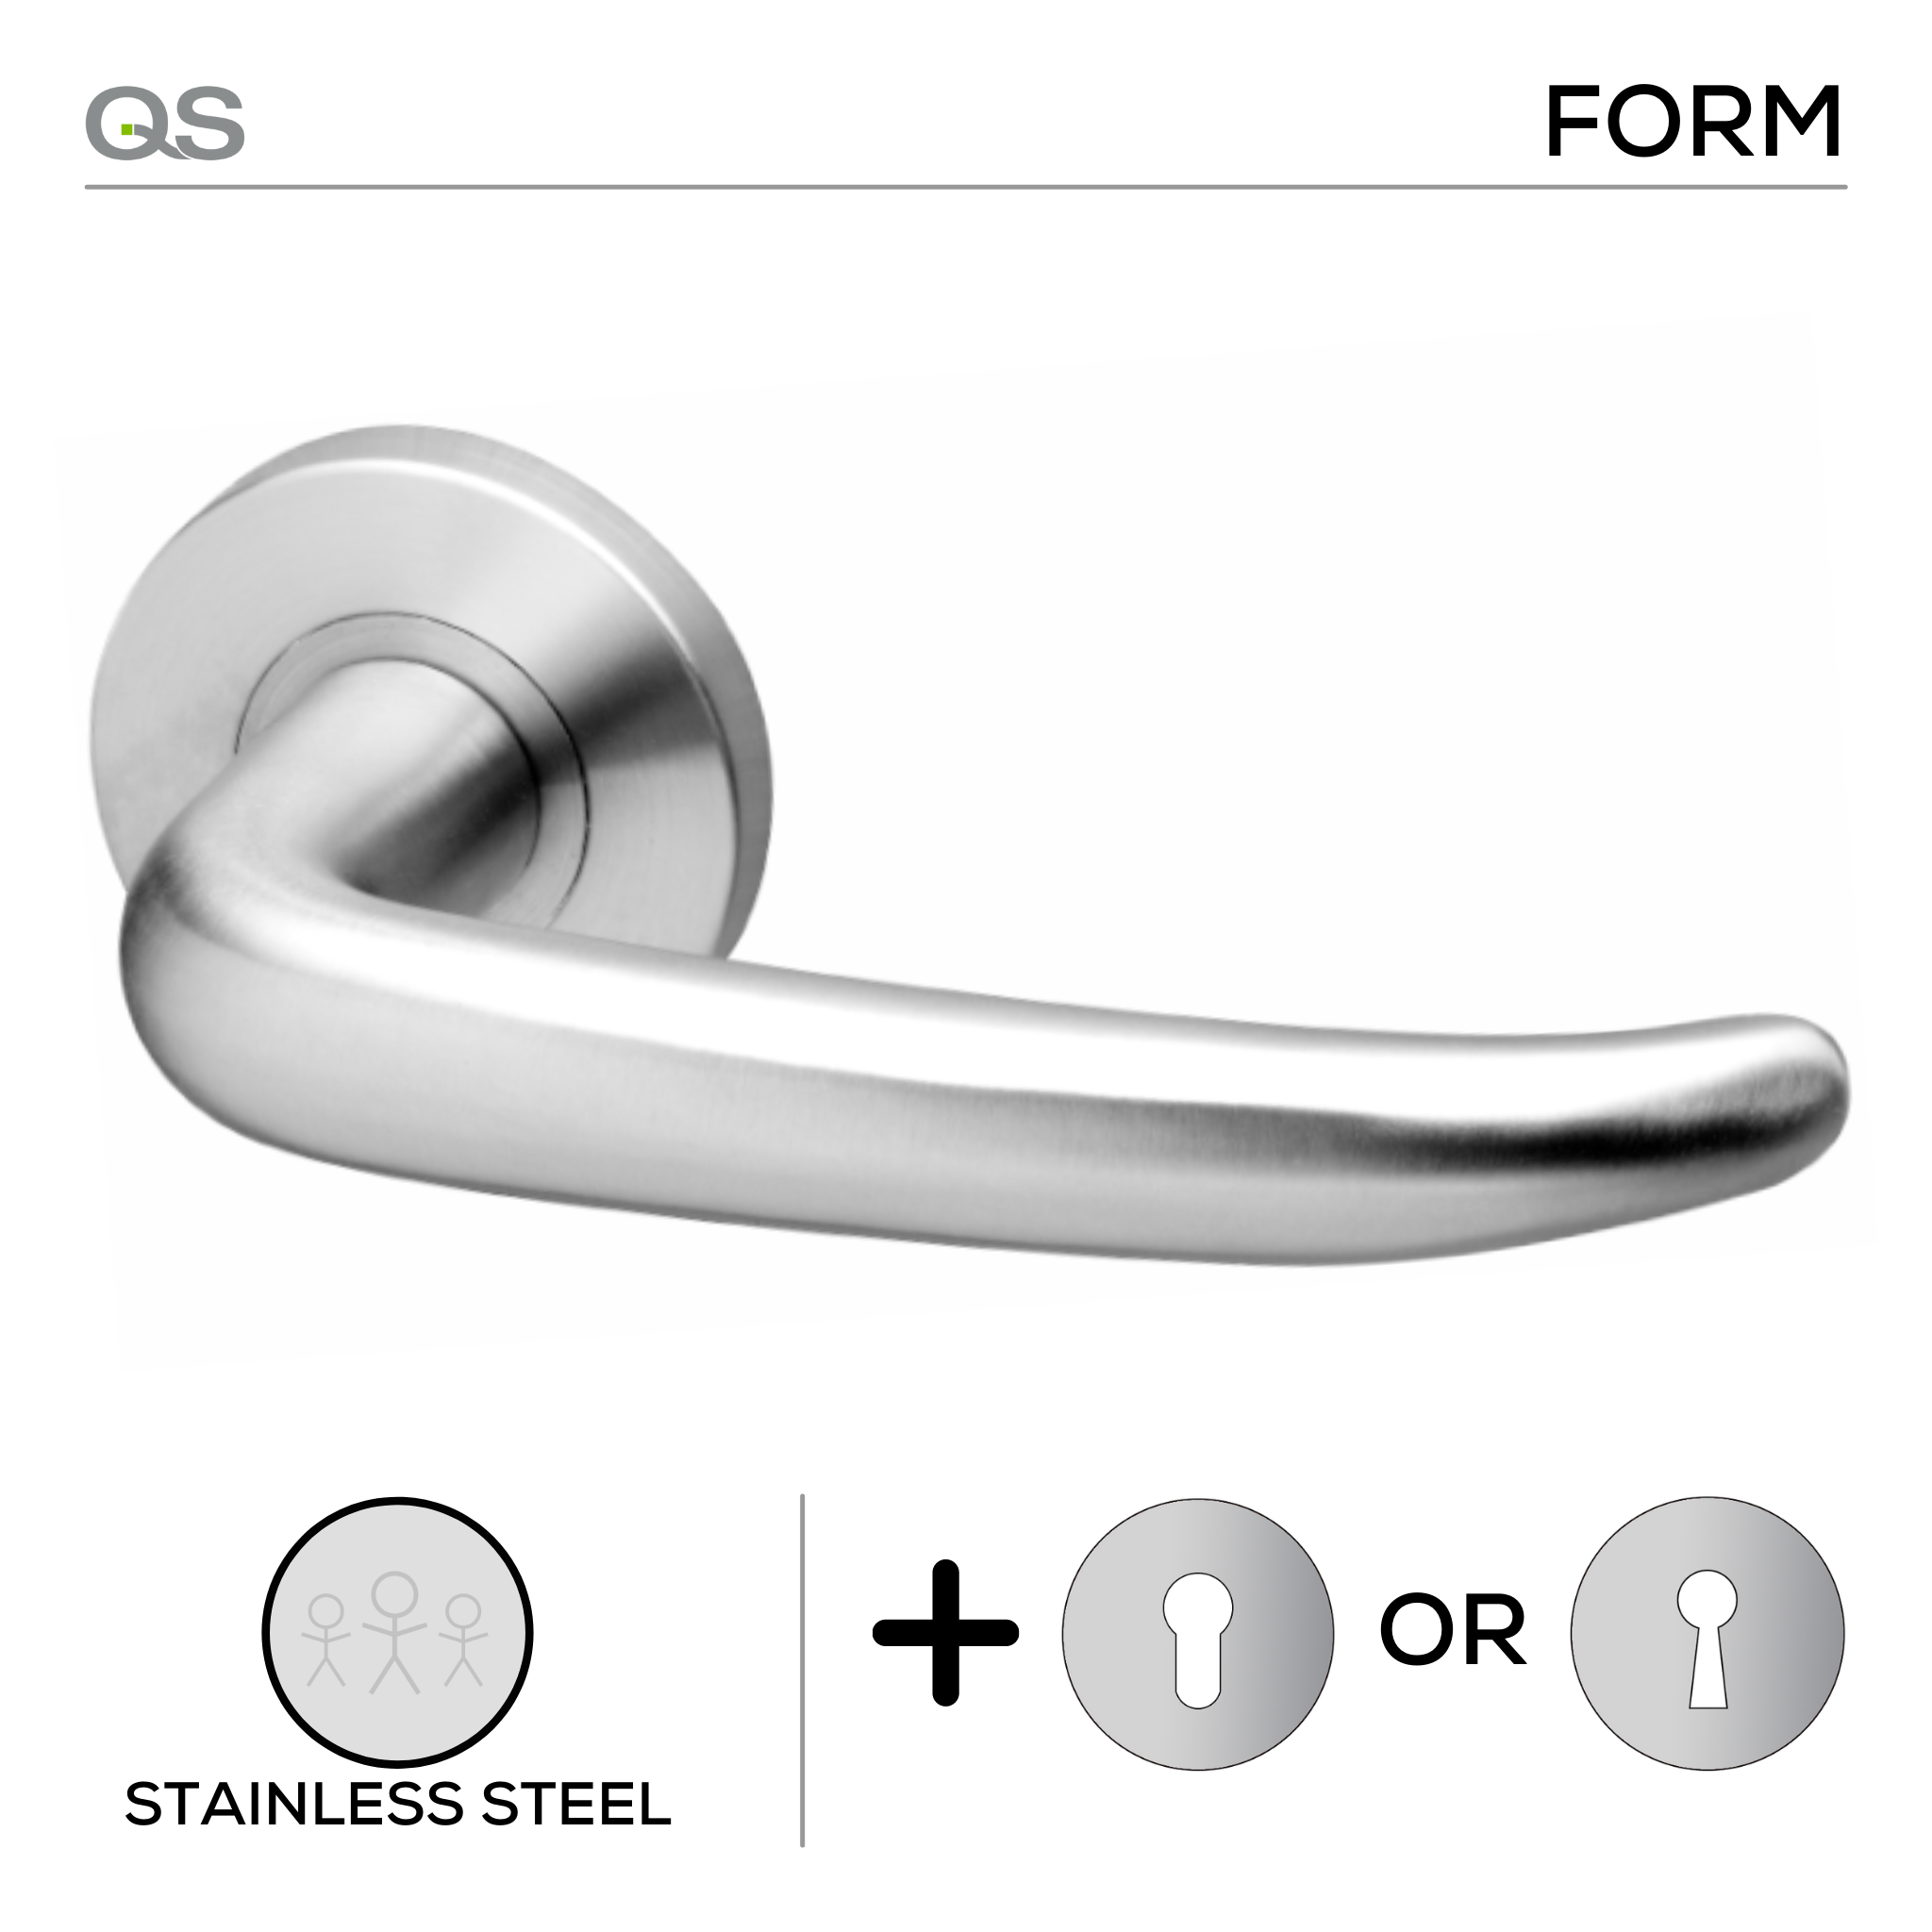 Riga, Lever Handles, Form, On Round Rose, With Escutcheons, Stainless Steel, QS